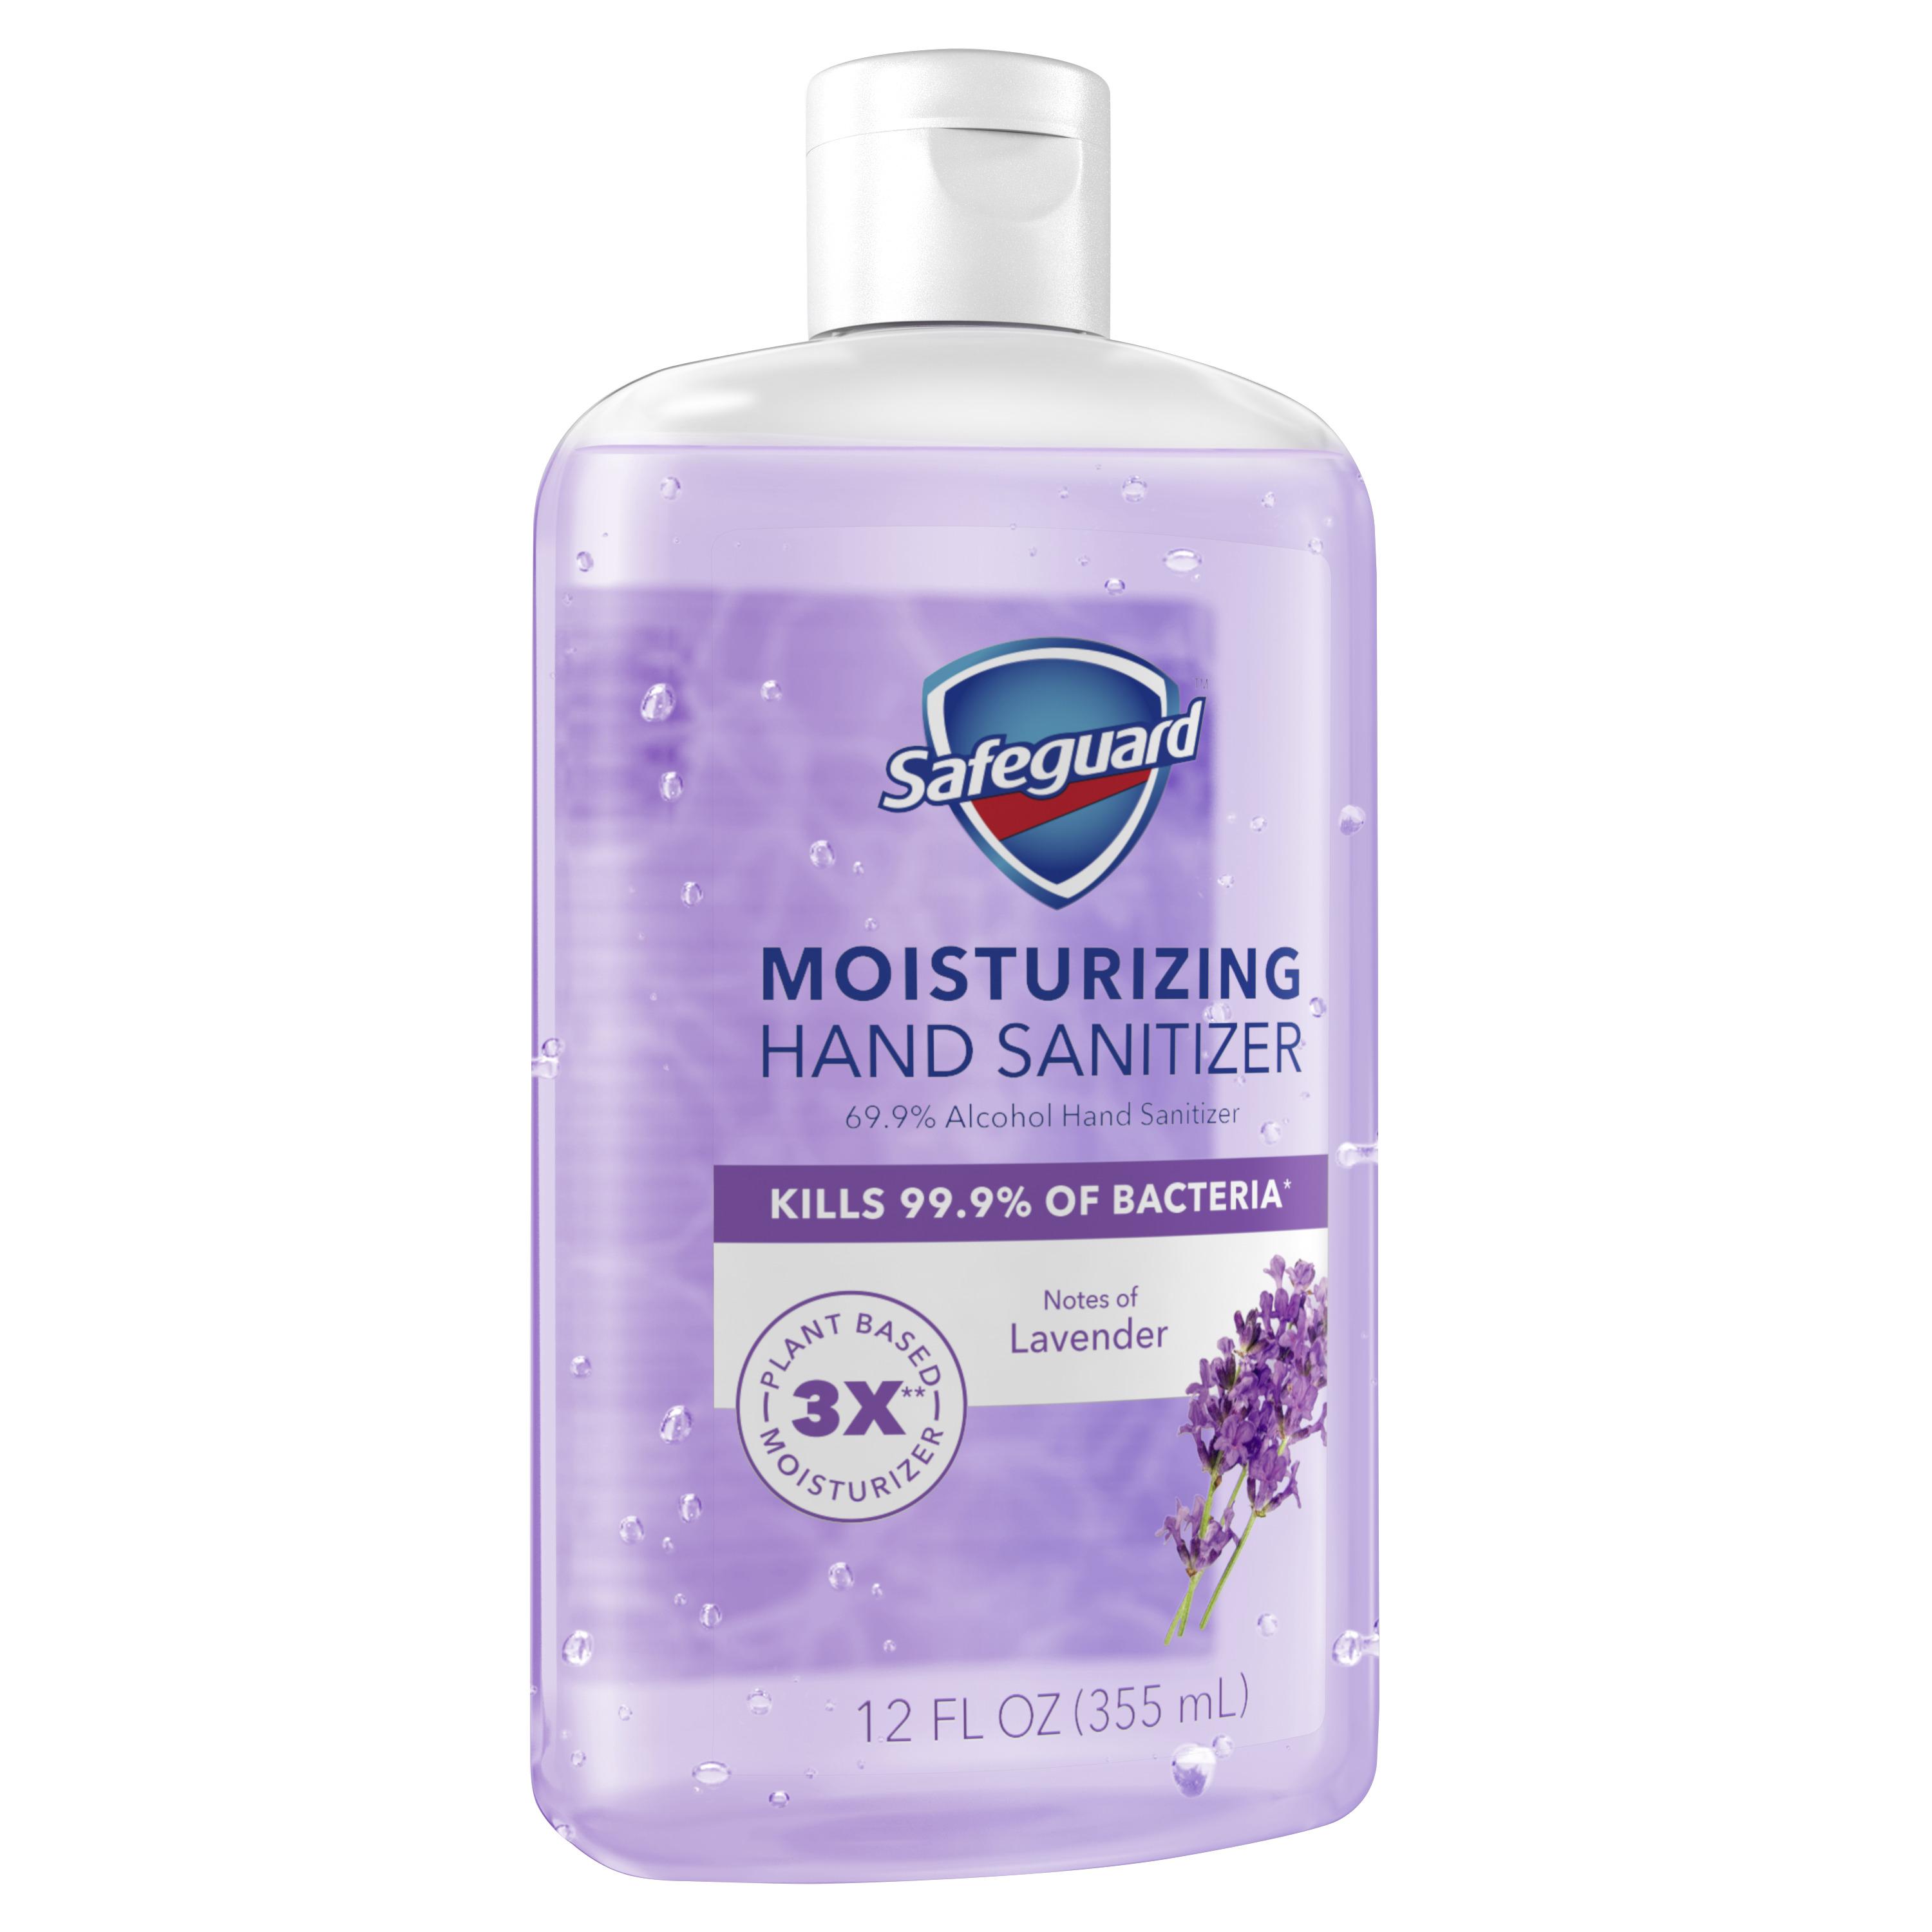 Safeguard Hand Sanitizer, Notes of Lavender, Contains Alcohol, 12 oz - image 2 of 4